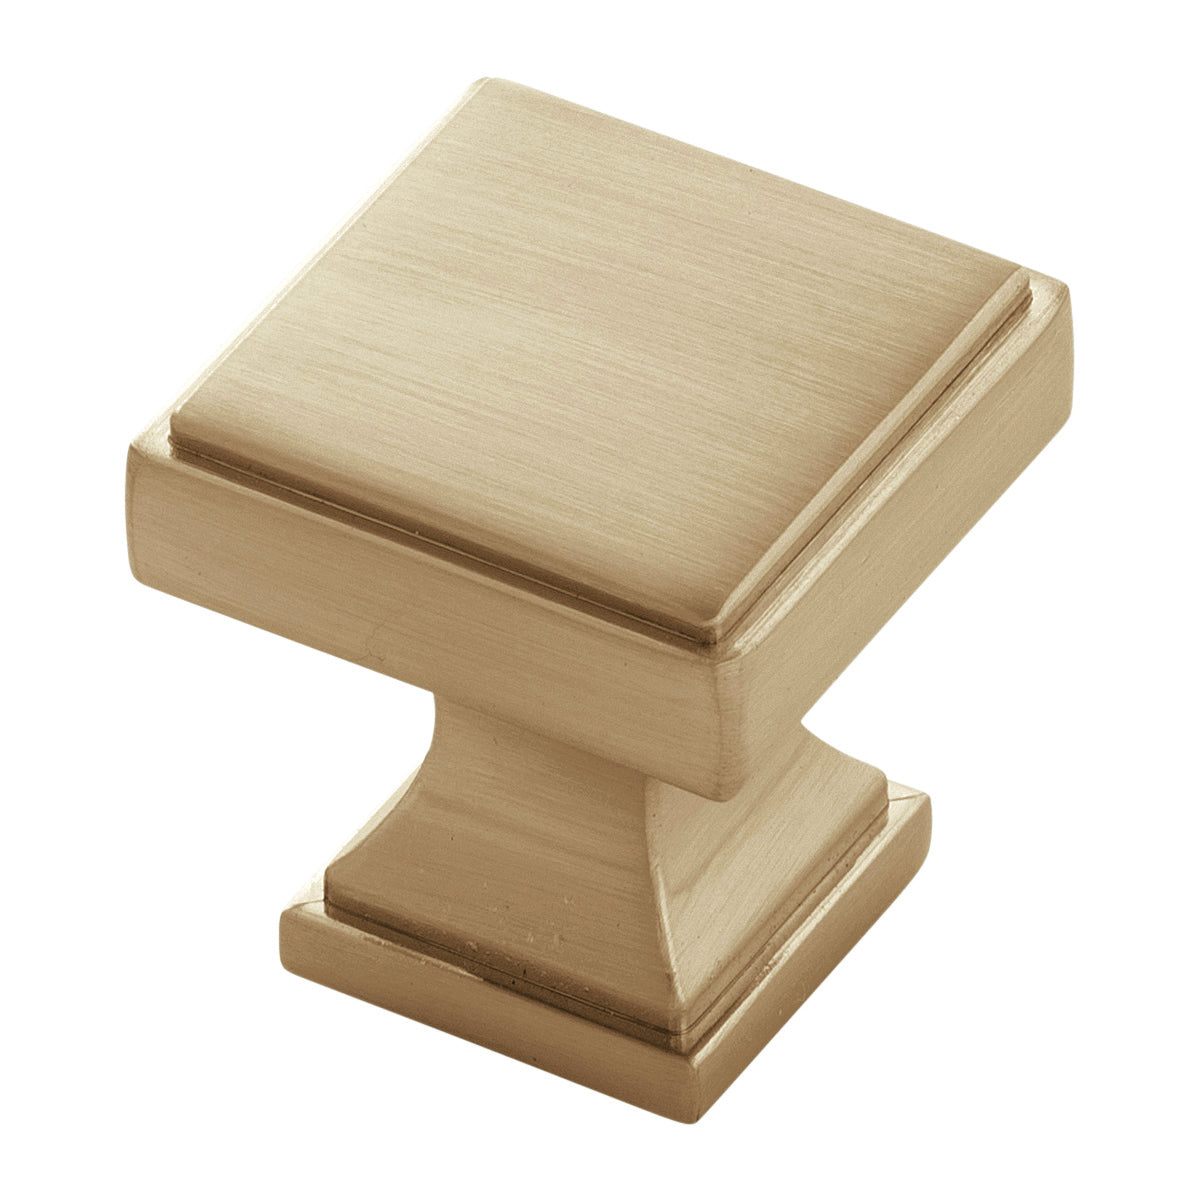 1 3/8-inch (35 mm) Burnished Brass Traditional Cabinet Knob